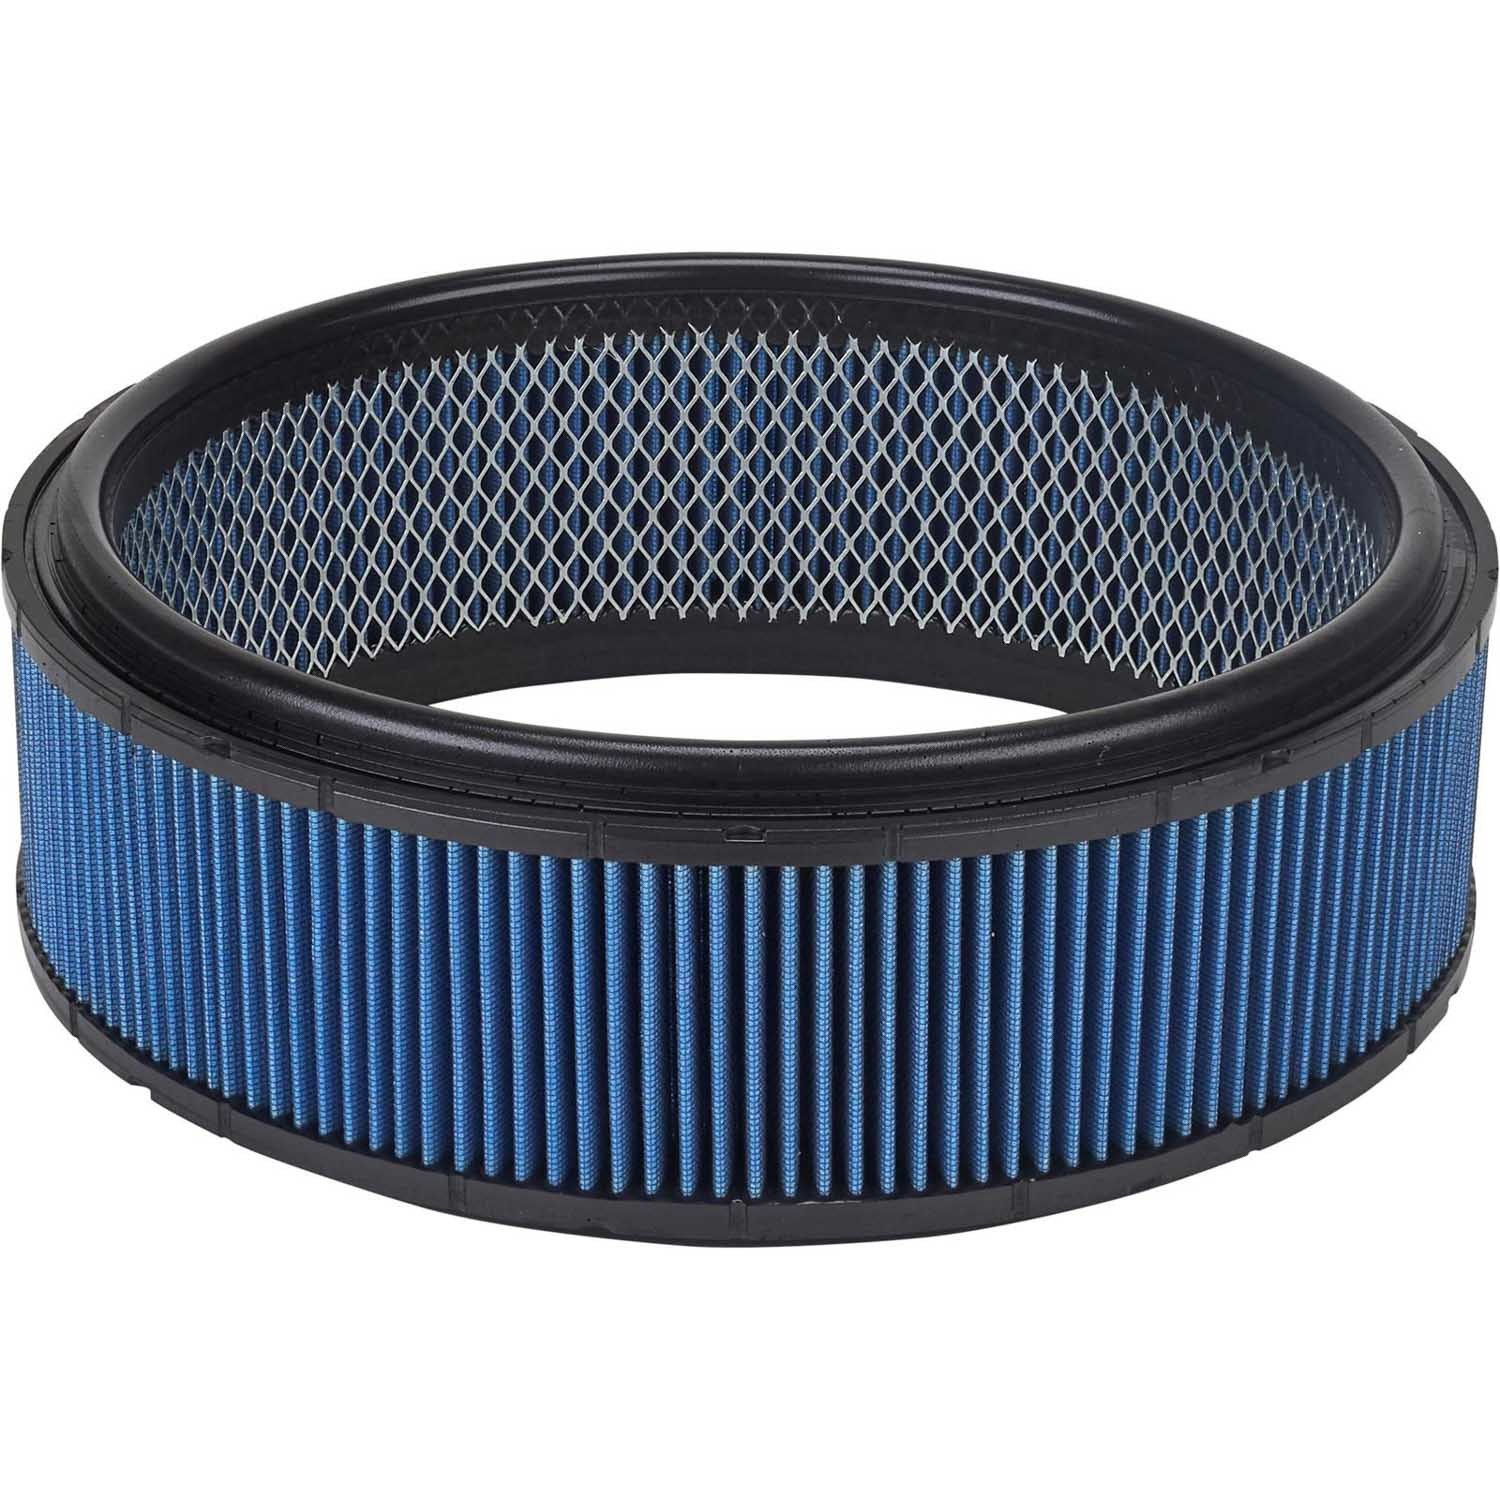 Walker Engineering 3000857-DM Air Filter Element, Low Profile, 14 in Diameter, 5 in Tall, Dry, Synthetic, Blue, Each